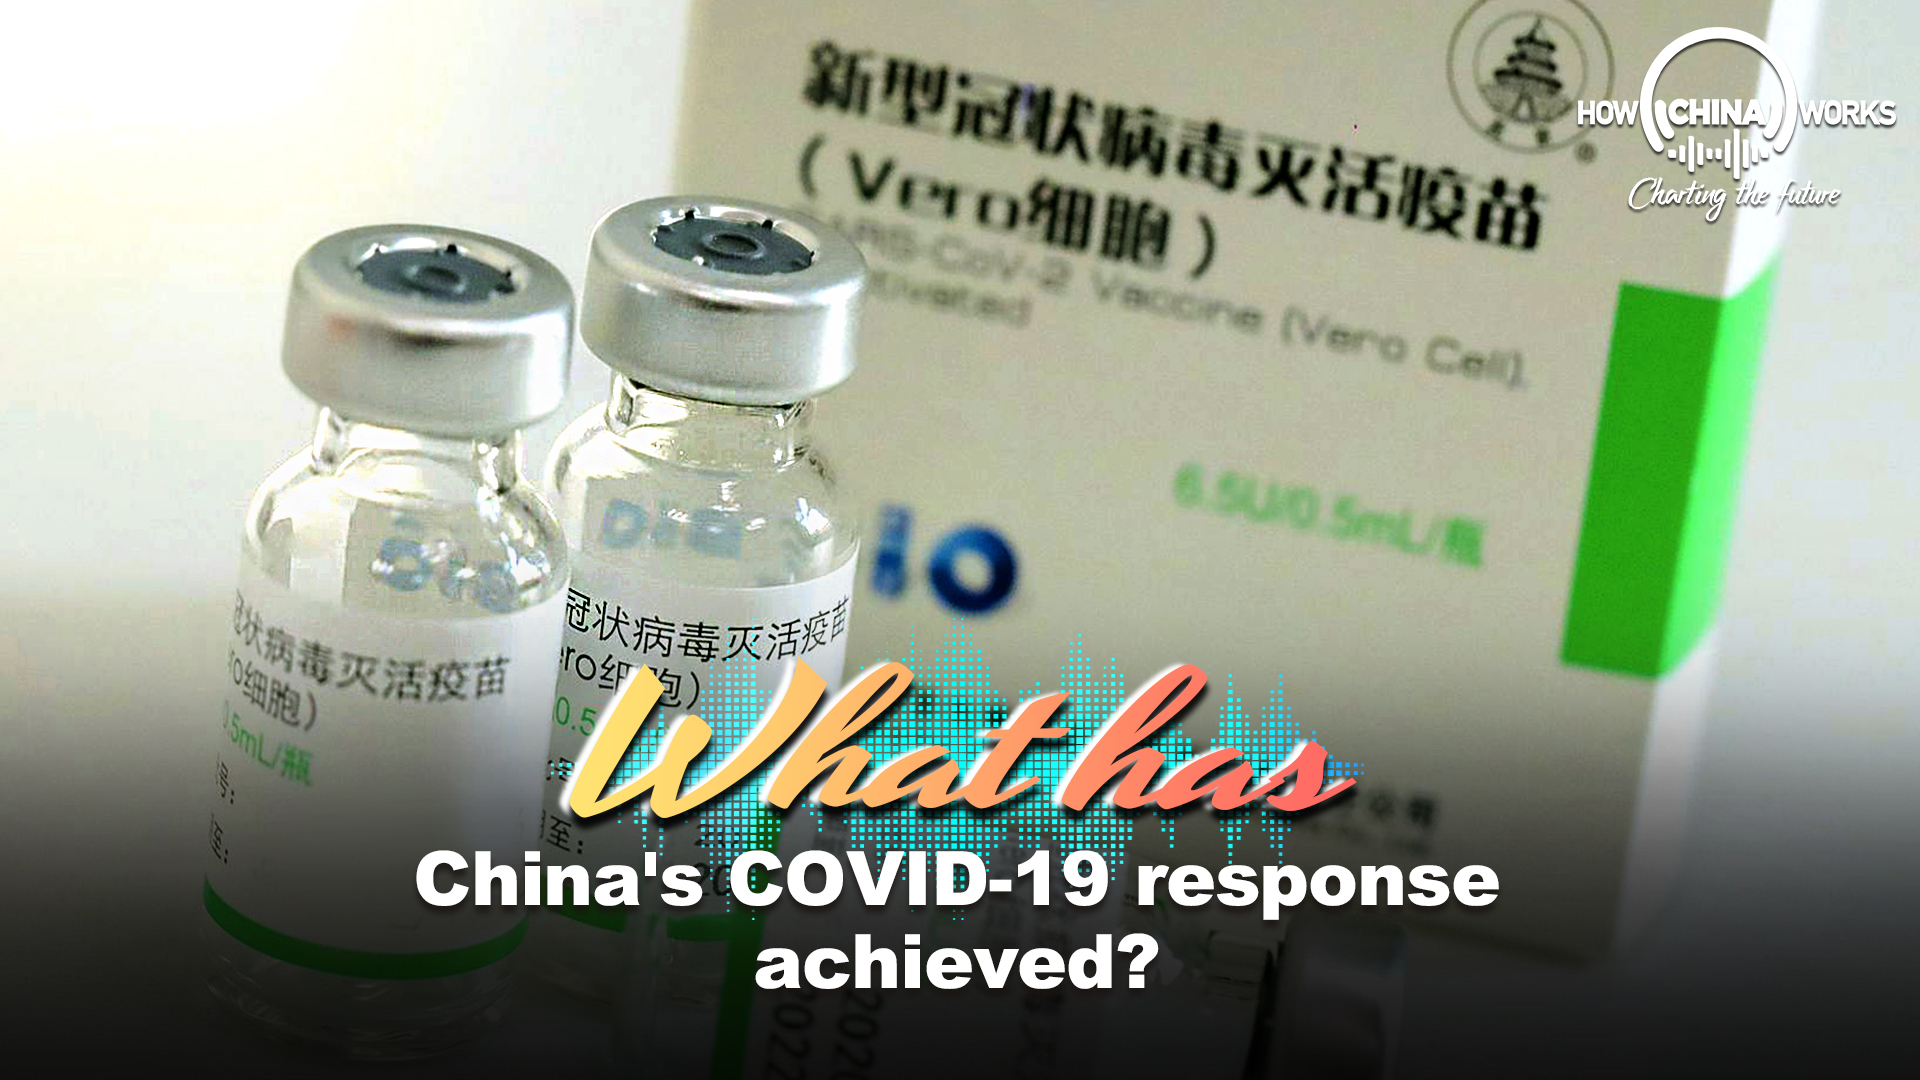 What has China's COVID-19 response achieved?